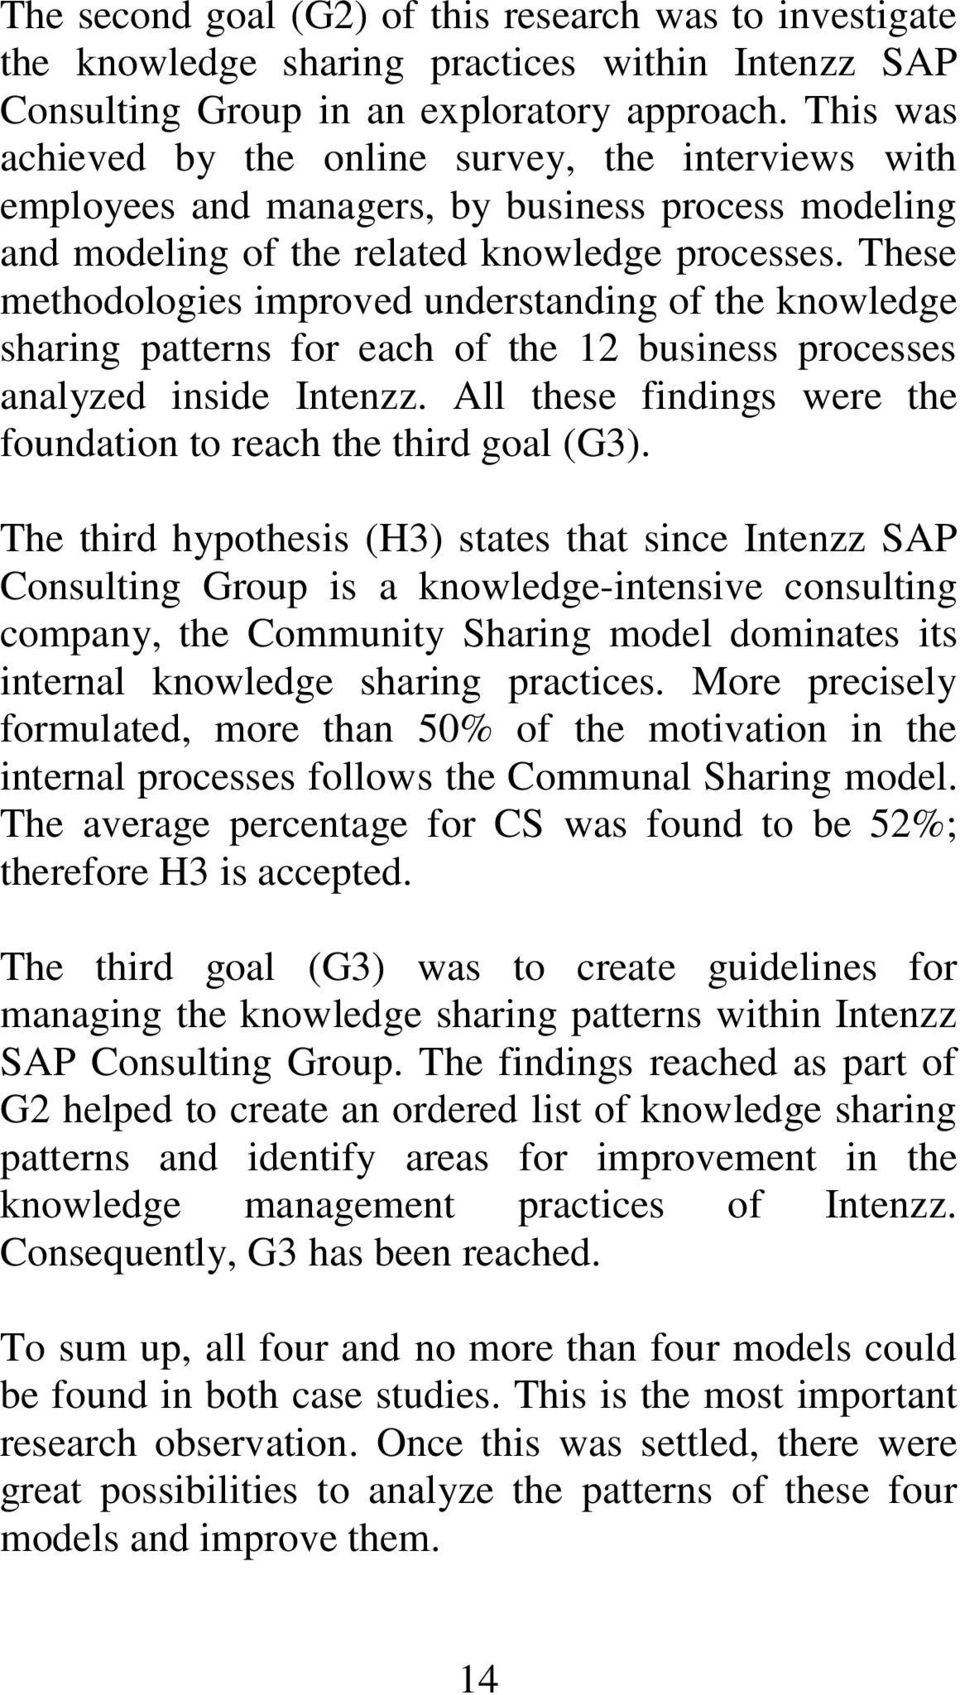 These methodologies improved understanding of the knowledge sharing patterns for each of the 12 business processes analyzed inside Intenzz.